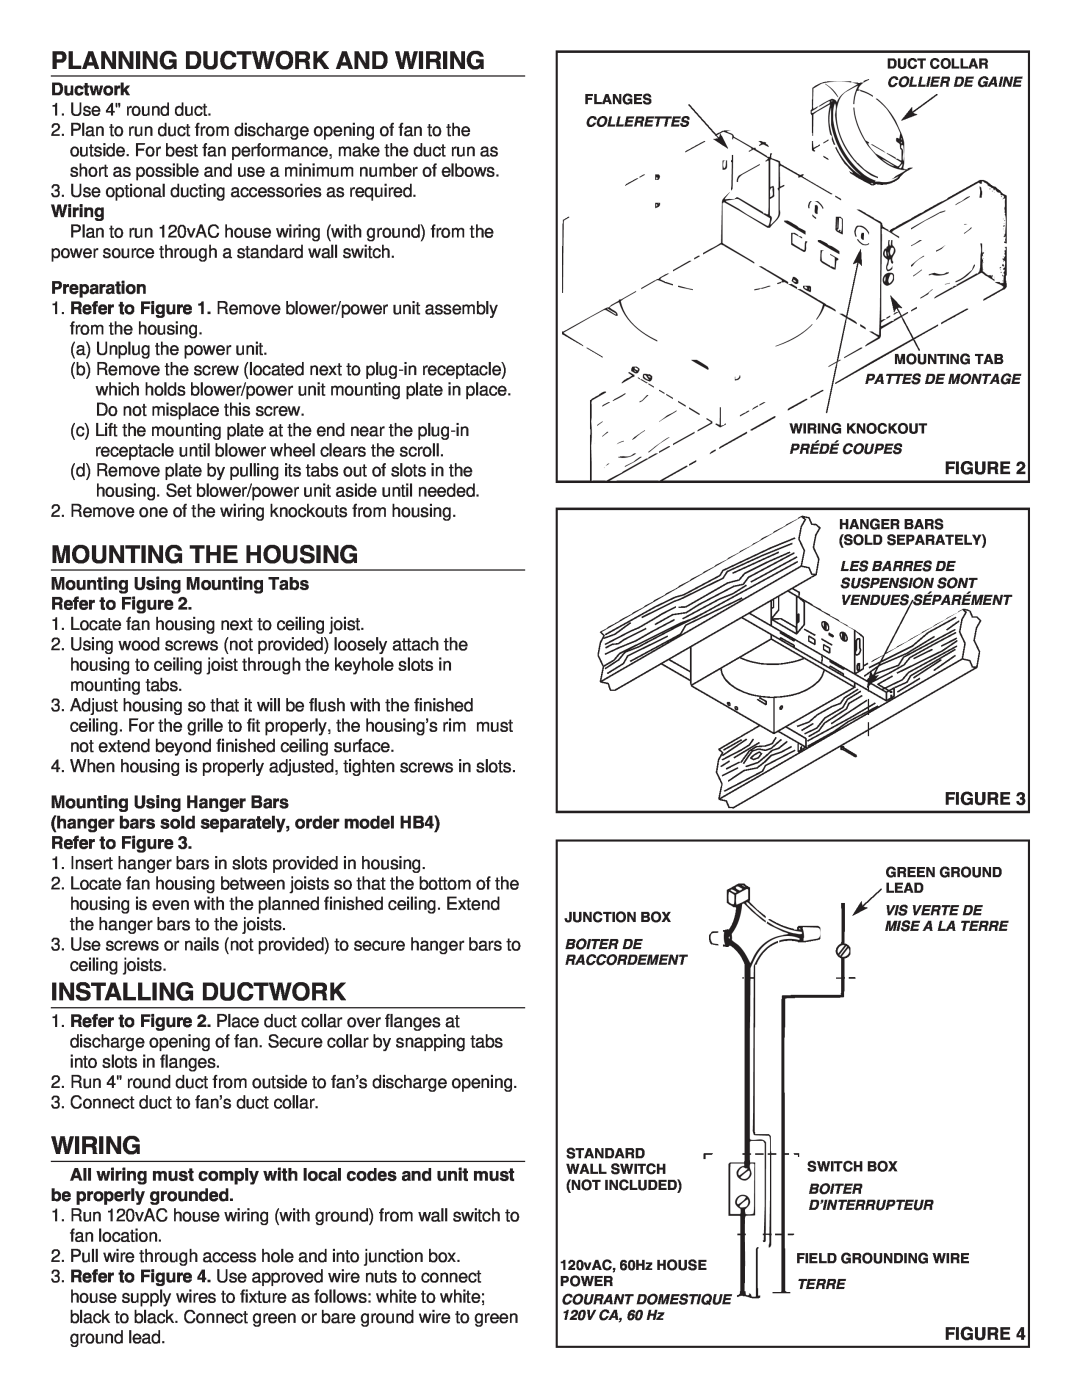 NuTone 672R, 671R important safety instructions Planning Ductwork And Wiring, Mounting The Housing, Installing Ductwork 